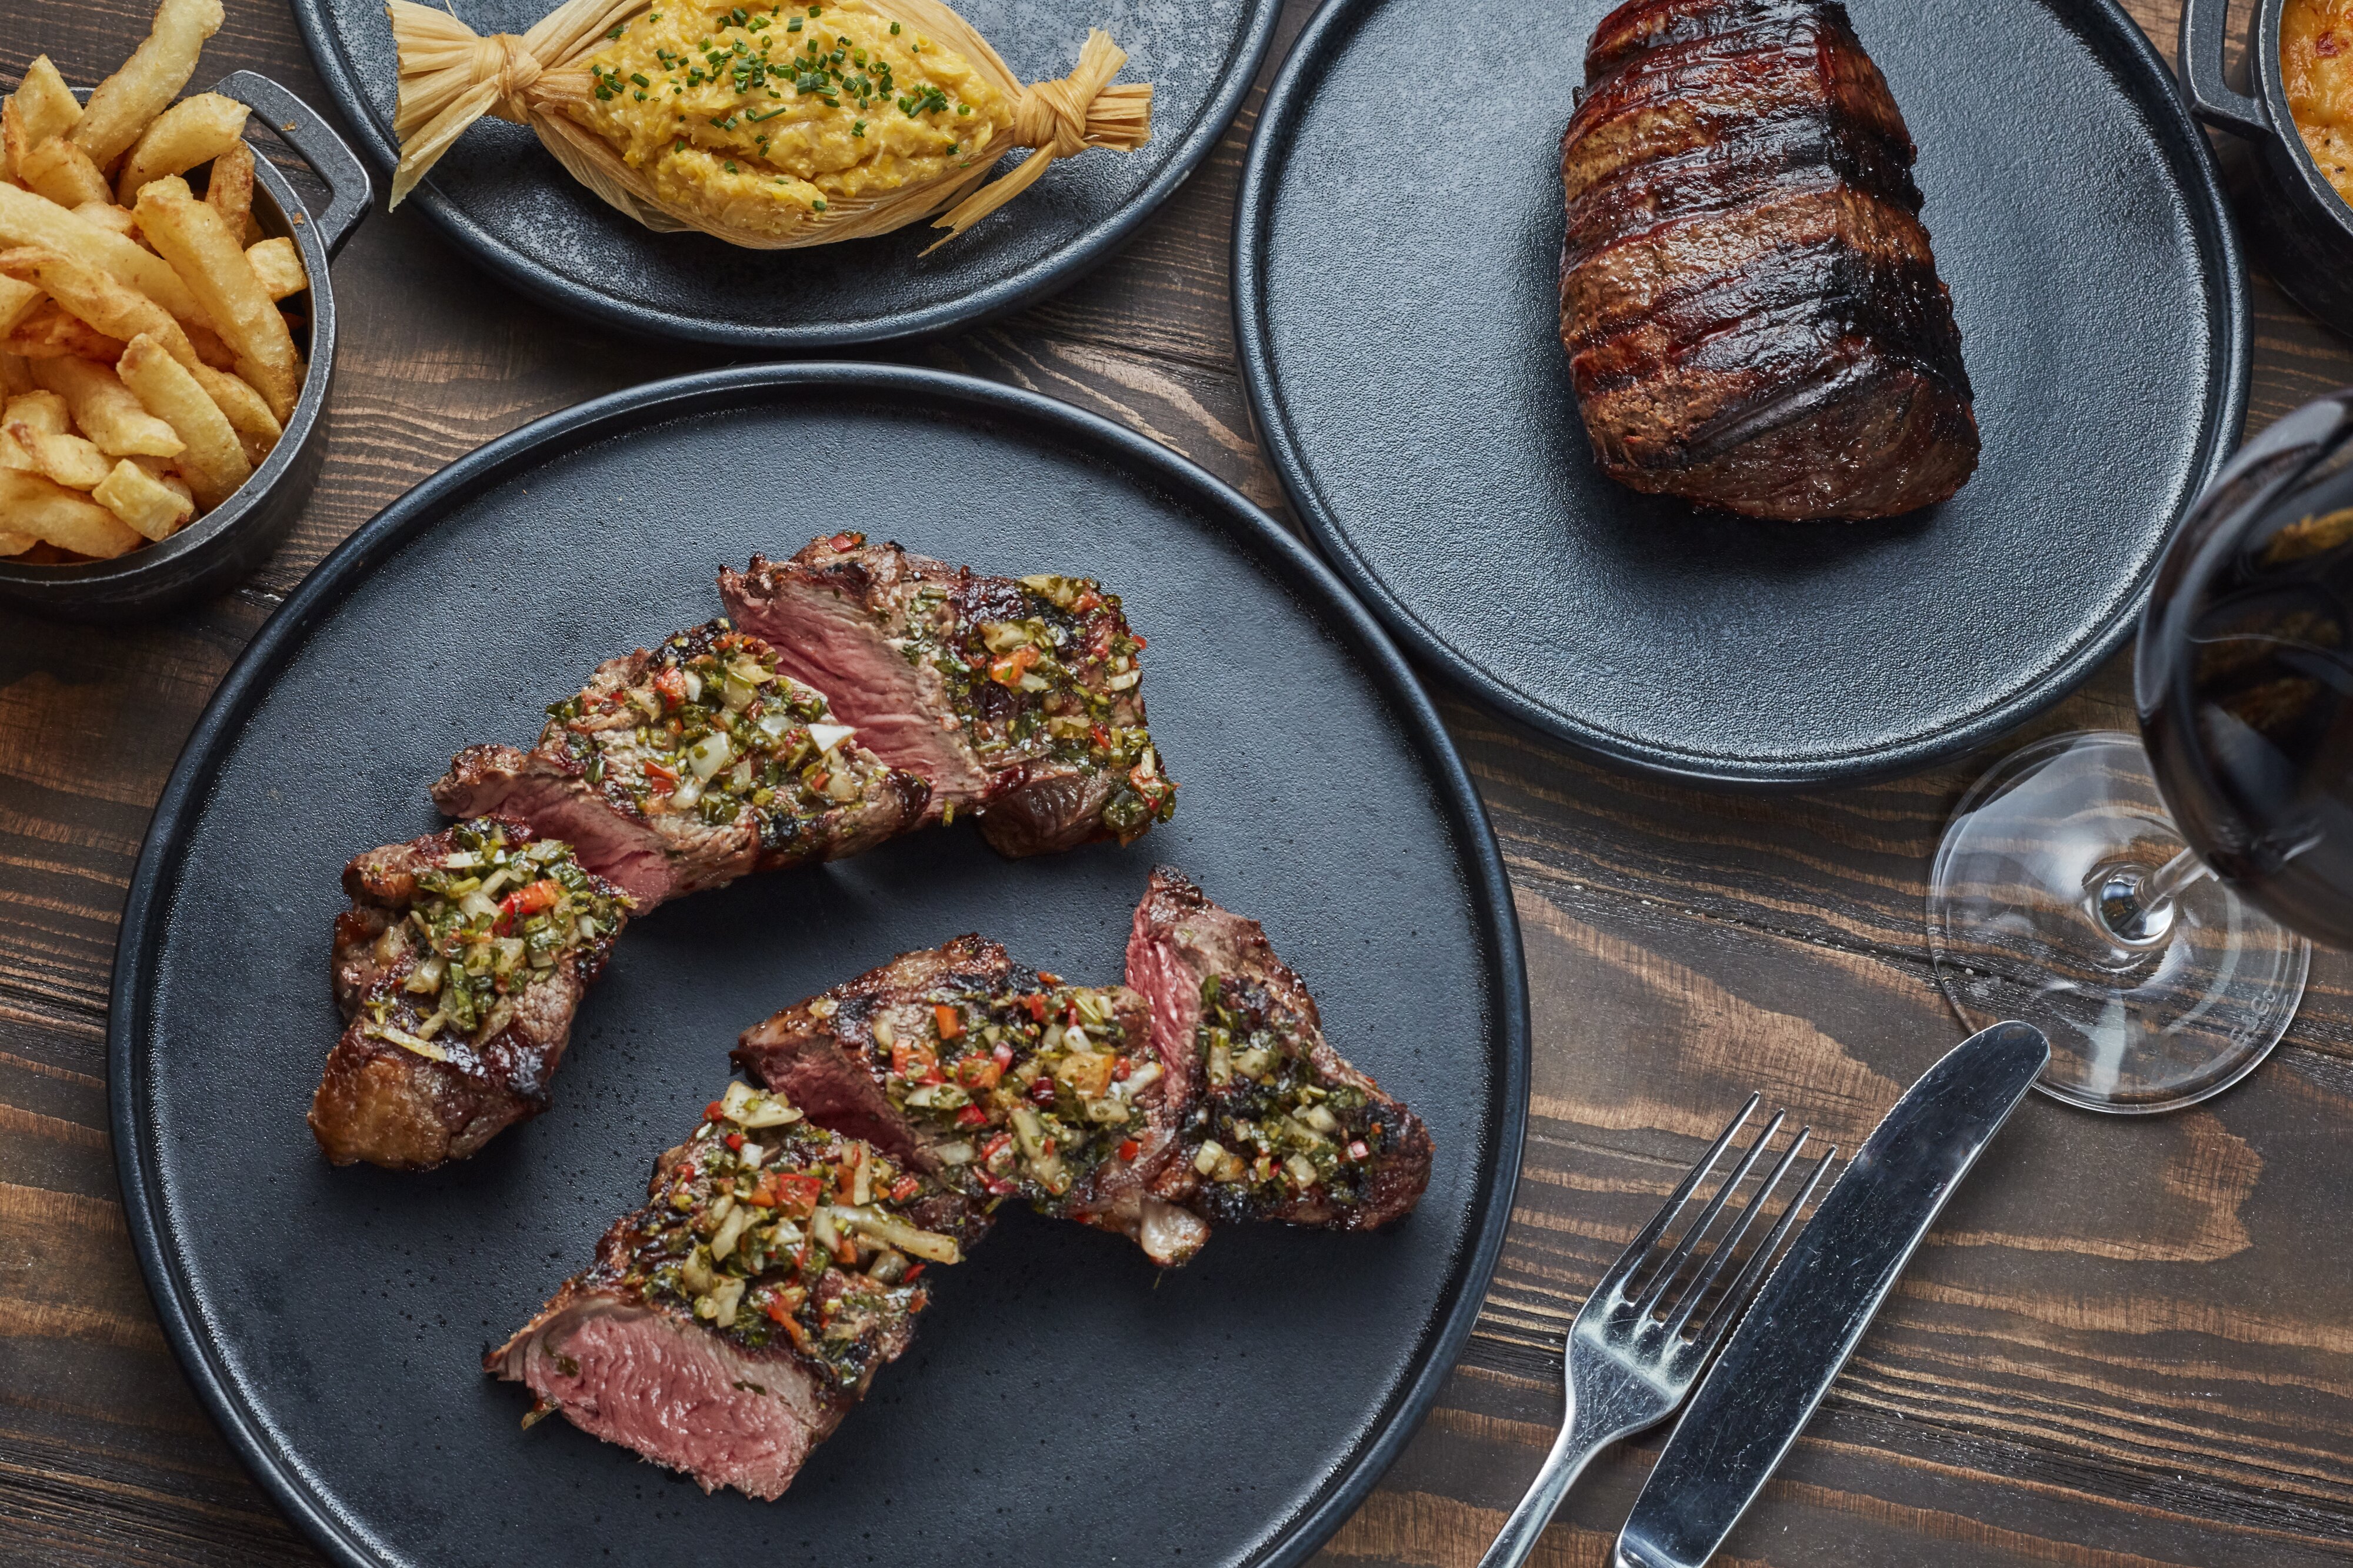 New Gaucho concept to serve ‘carbon-neutral’ beef